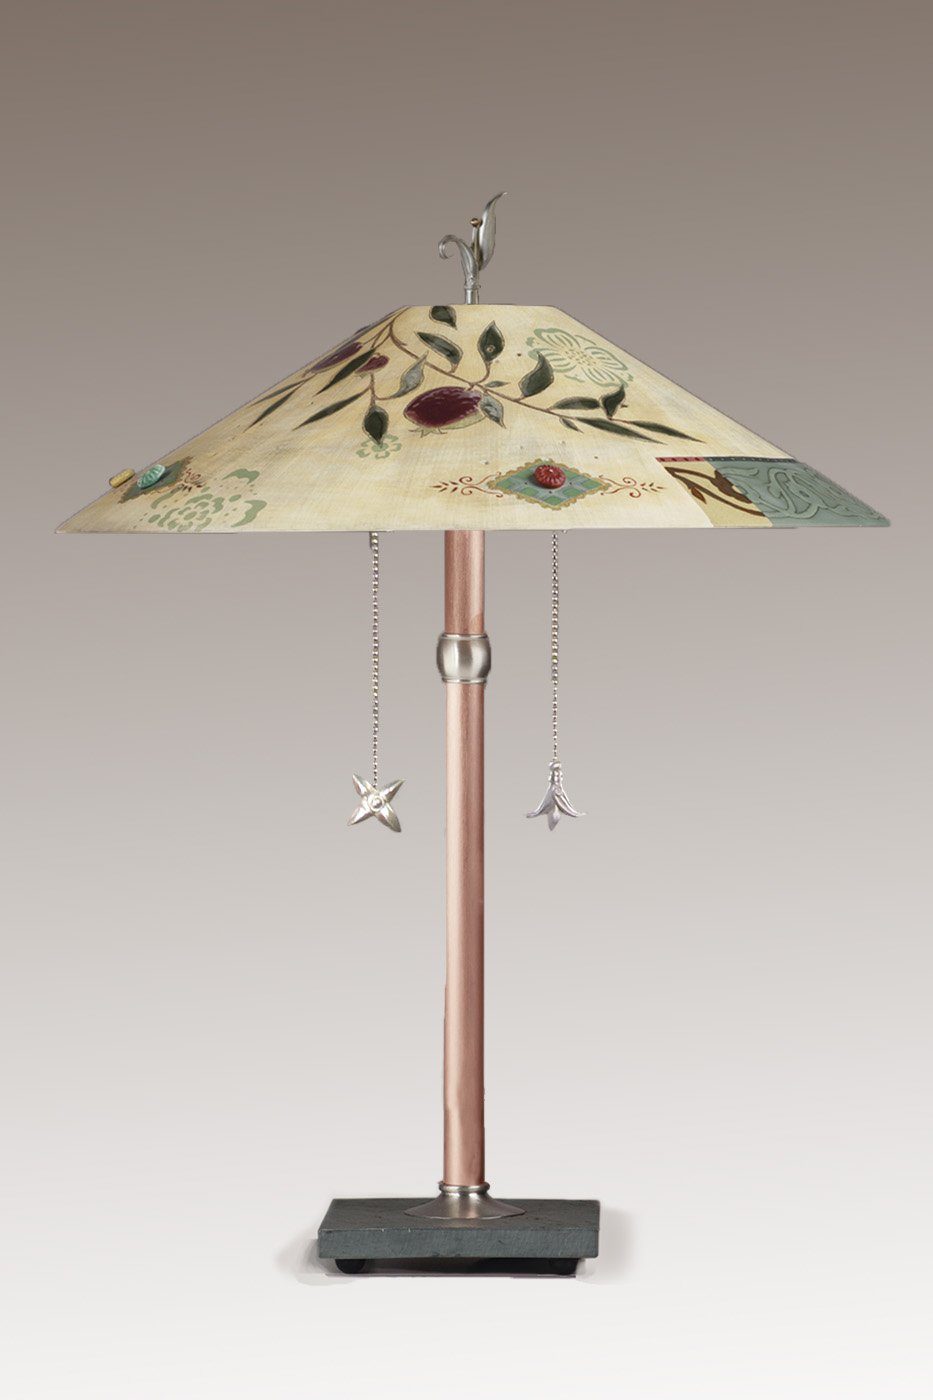 Copper Table Lamp with Large Wide Conical Ceramic Shade in Pomegranate